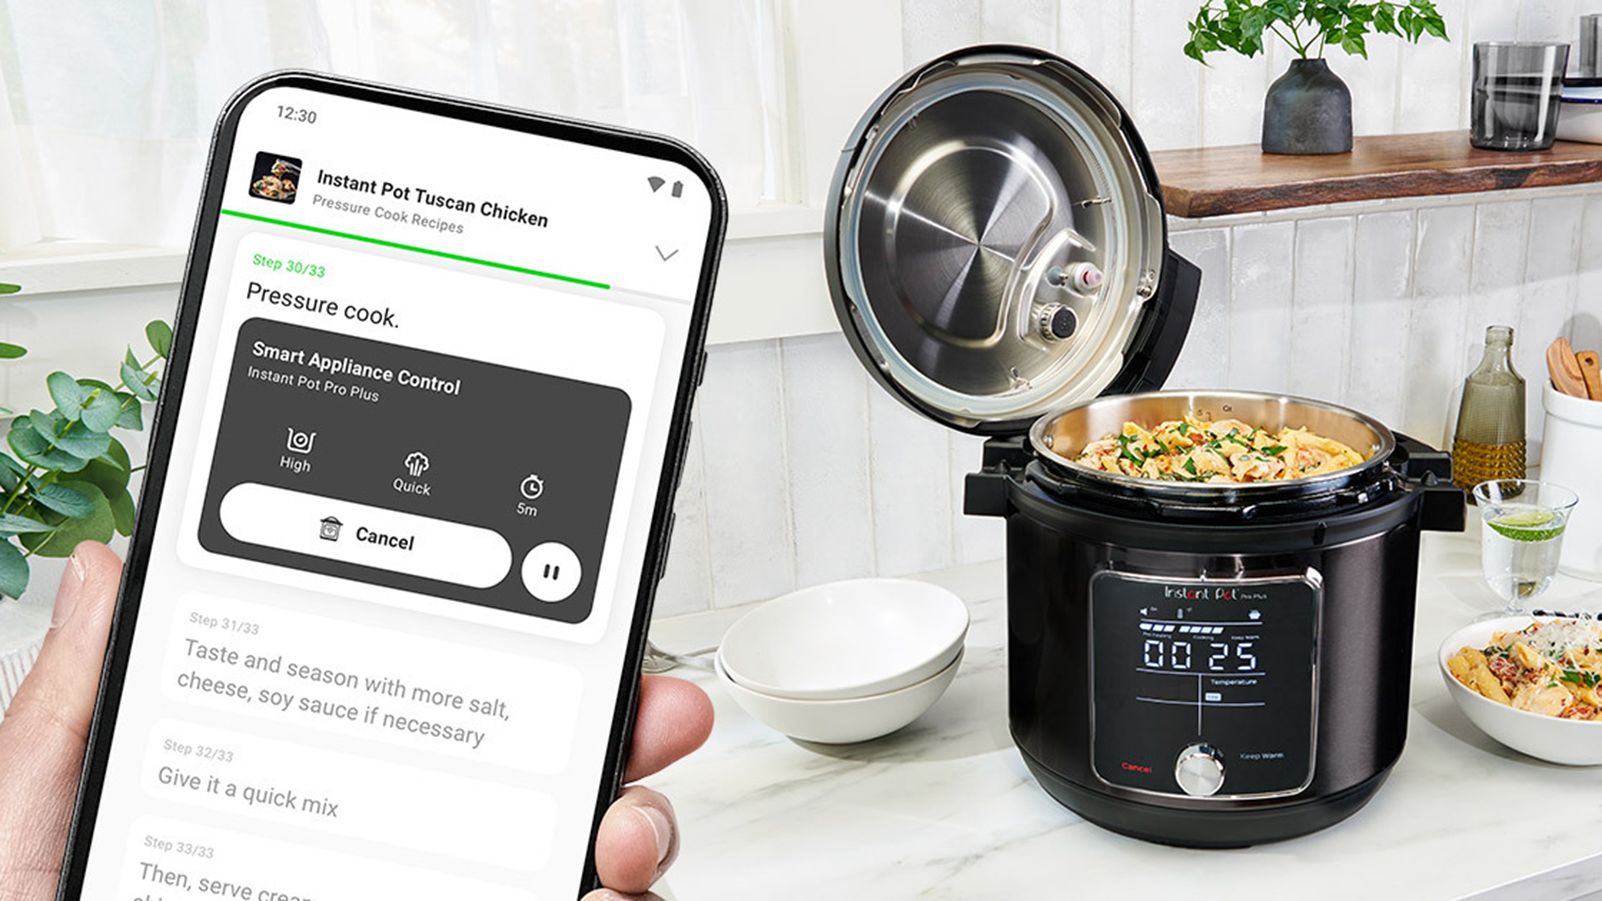 This Crock-Pot can be controlled with an app